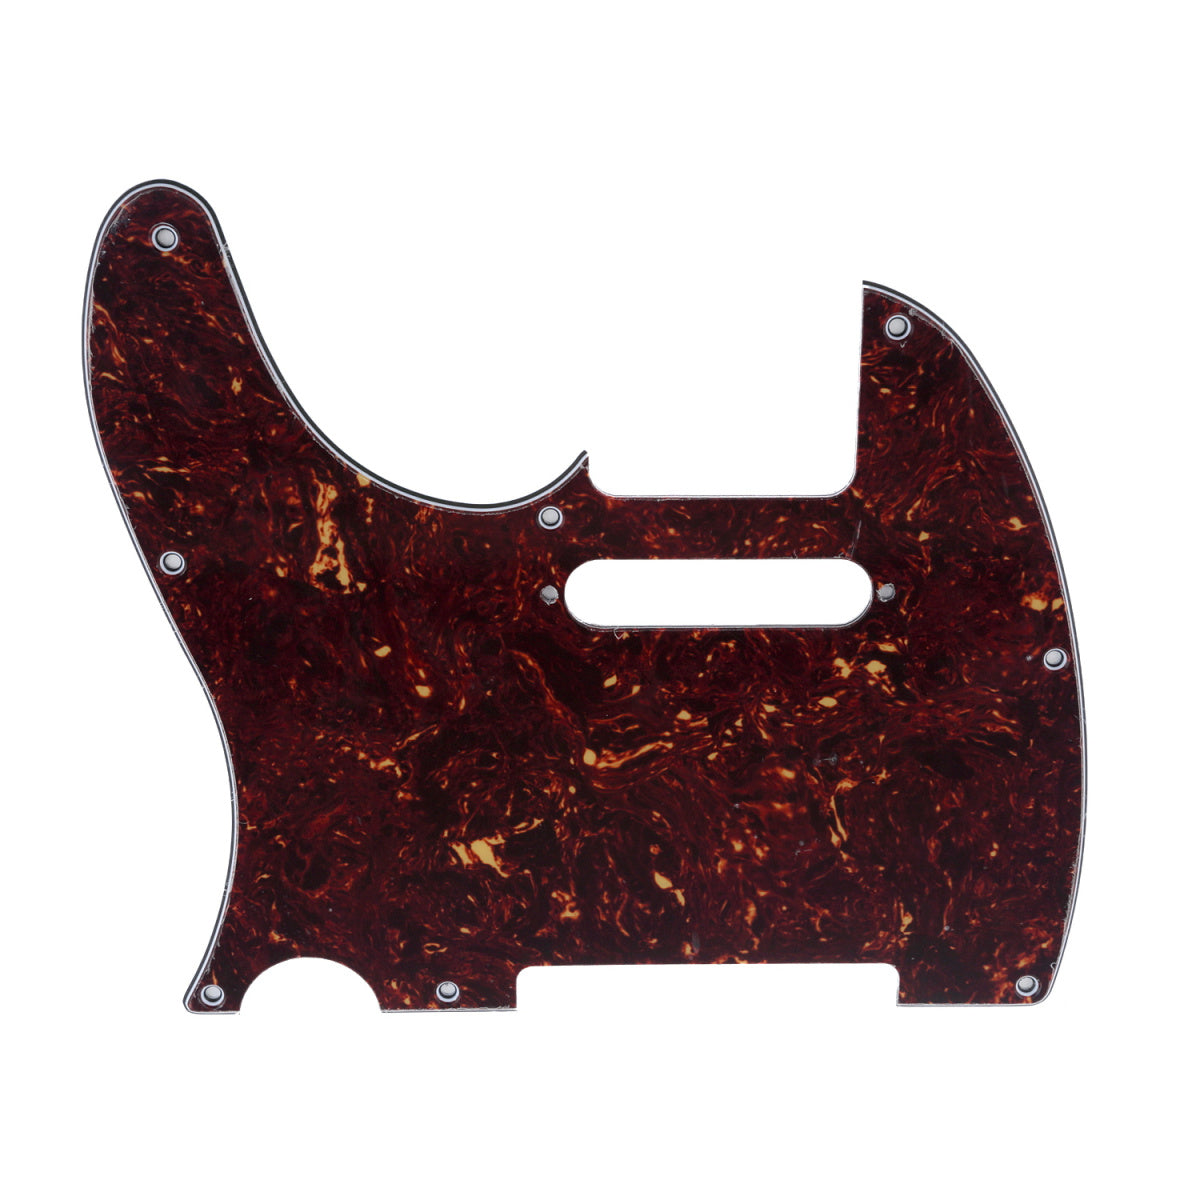 Musiclily Left Handed 8 Hole Guitar Tele Pickguard for American/Mexican Made Fender Telecaster Standard Modern Style, 4Ply Tortoise Shell